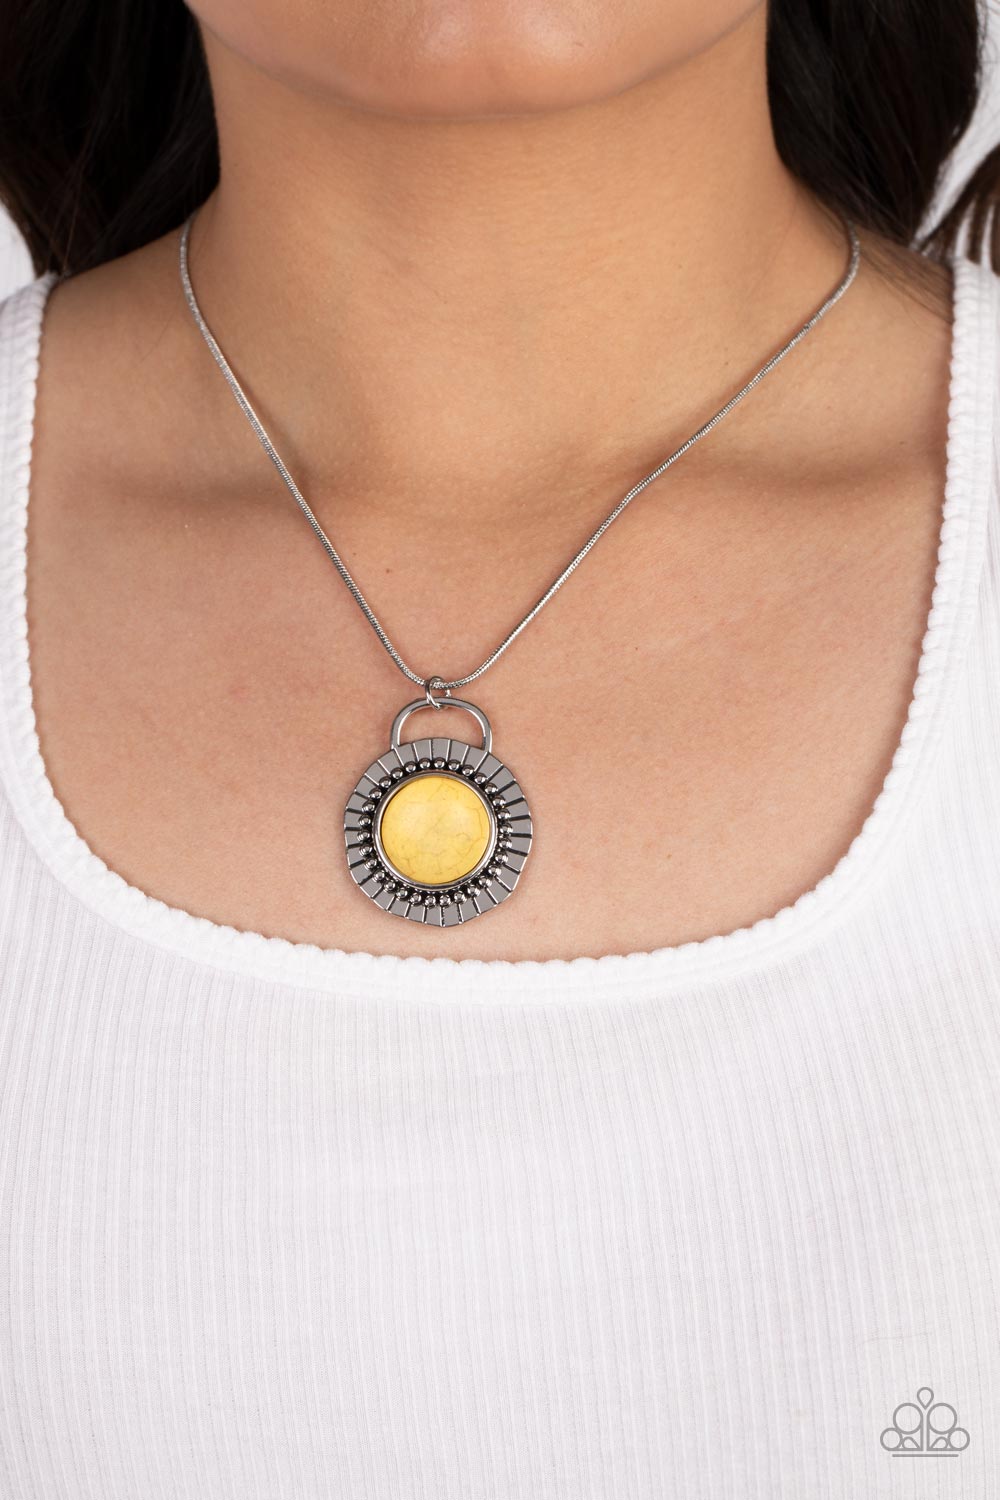 New Age Nomad Yellow Stone Necklace - Paparazzi Accessories-on model - CarasShop.com - $5 Jewelry by Cara Jewels